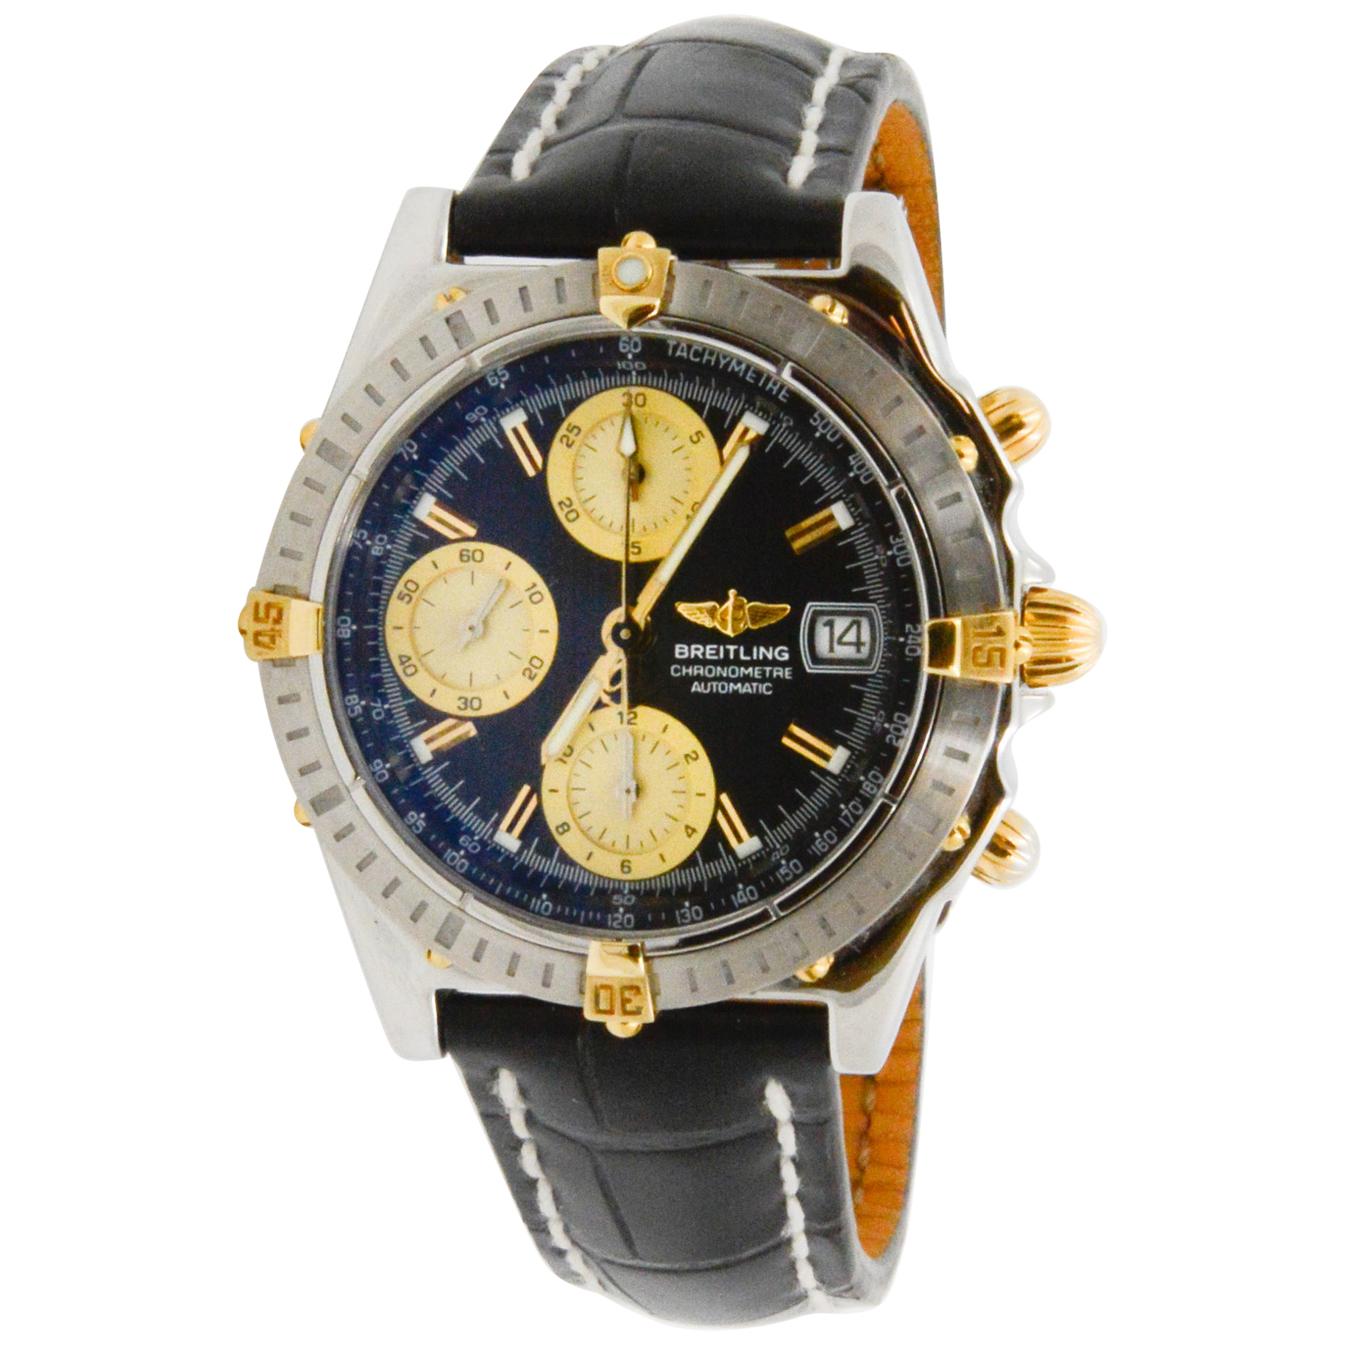 This CPO circa 2007 Breitling Chronomat Steel 40mm timepiece has a black dial with three gold subdials, date and steel bezel with four gold markers. The watch measures at 20mmx18mm. It is paired with a crocodile strap with white stitching, steel